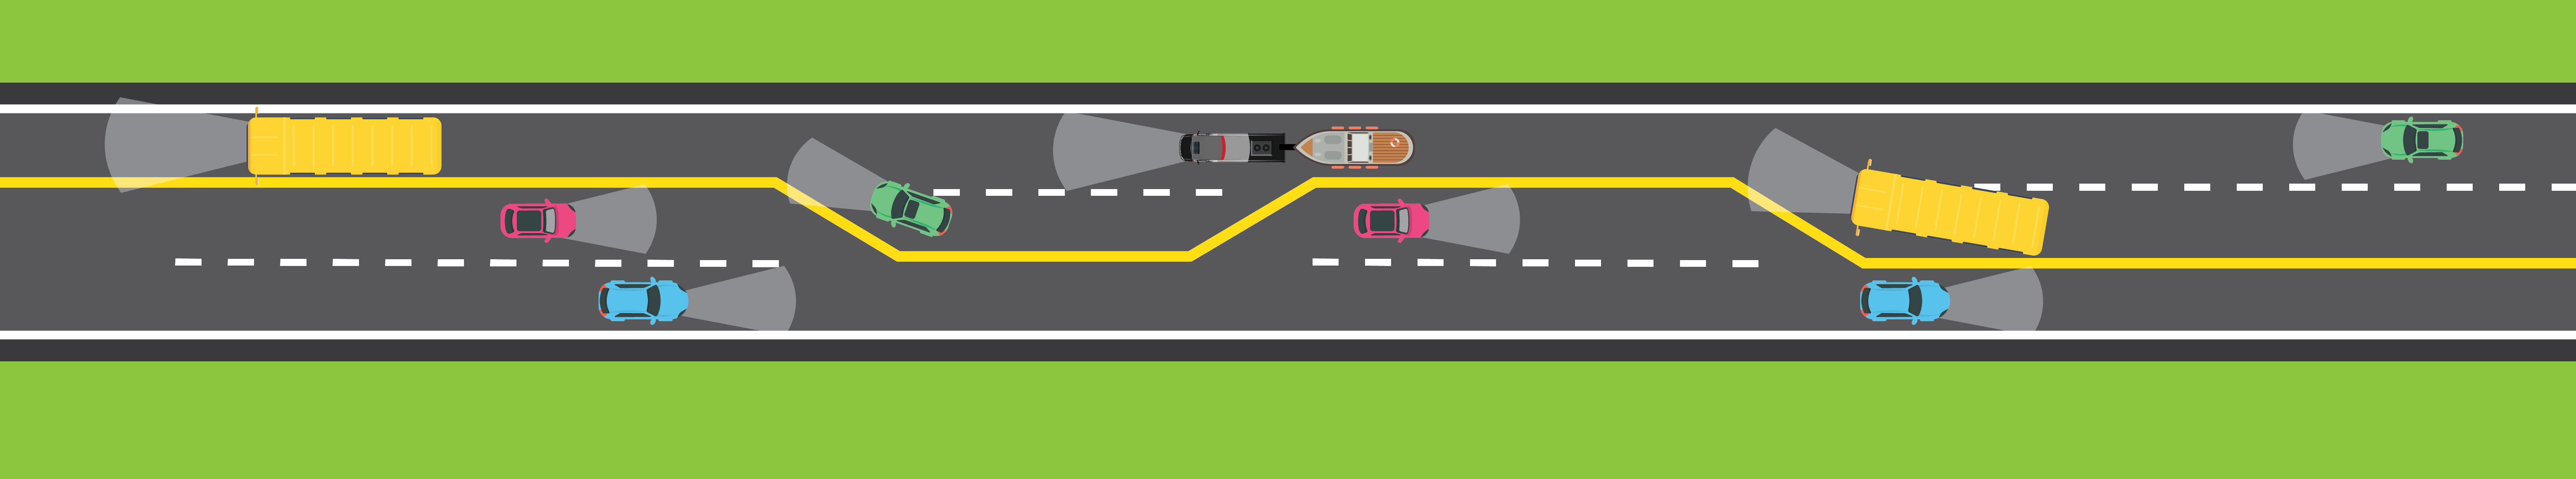 Graphic of alternating passing lanes along the inside lanes.